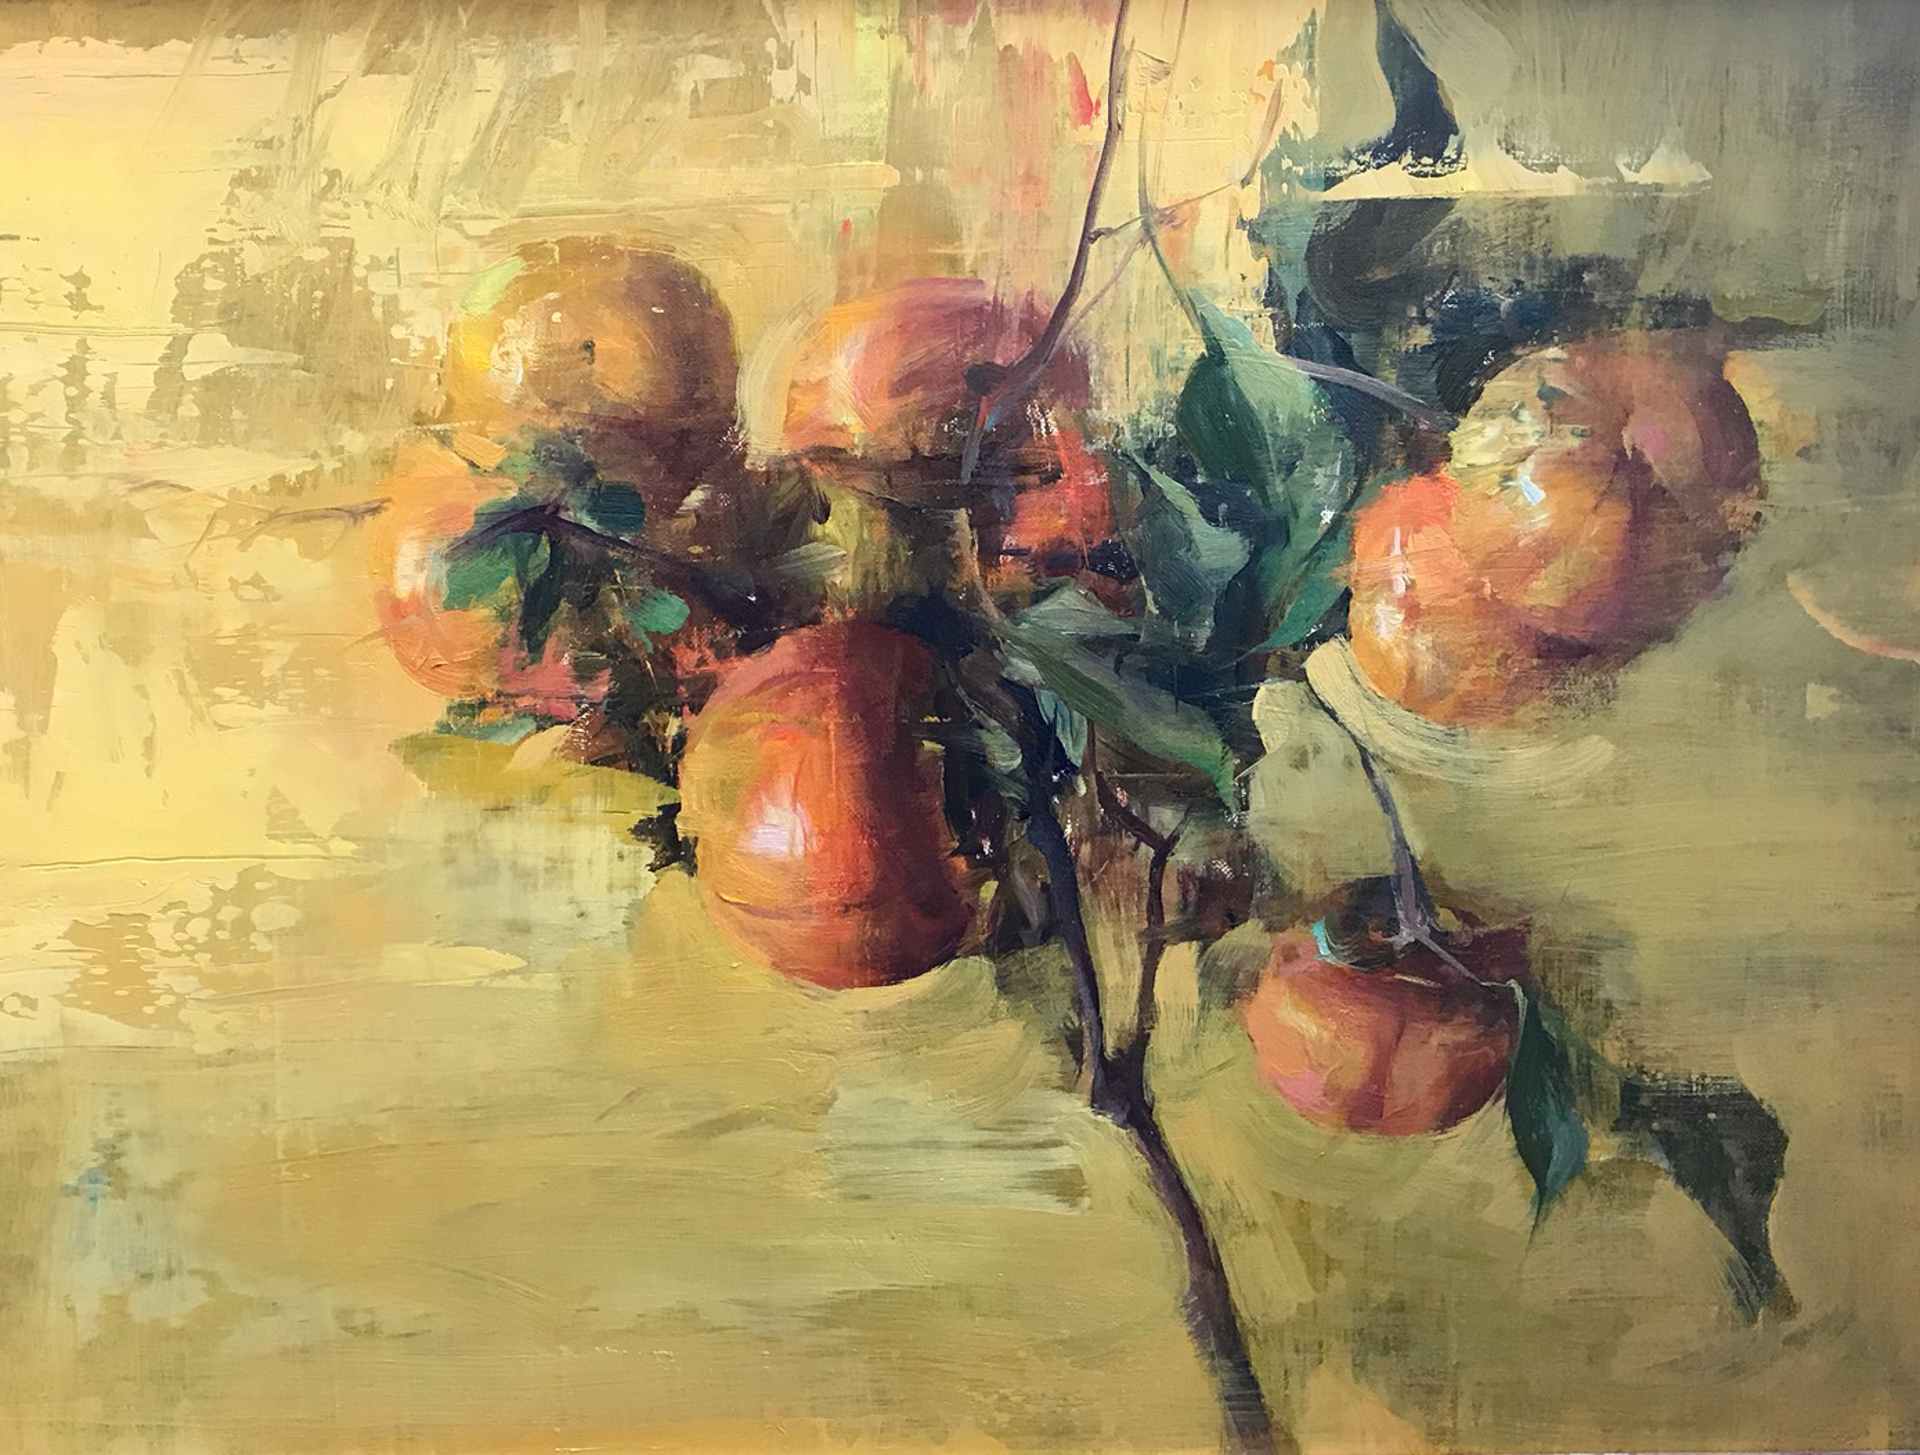 The Gift of Persimmons by Quang Ho